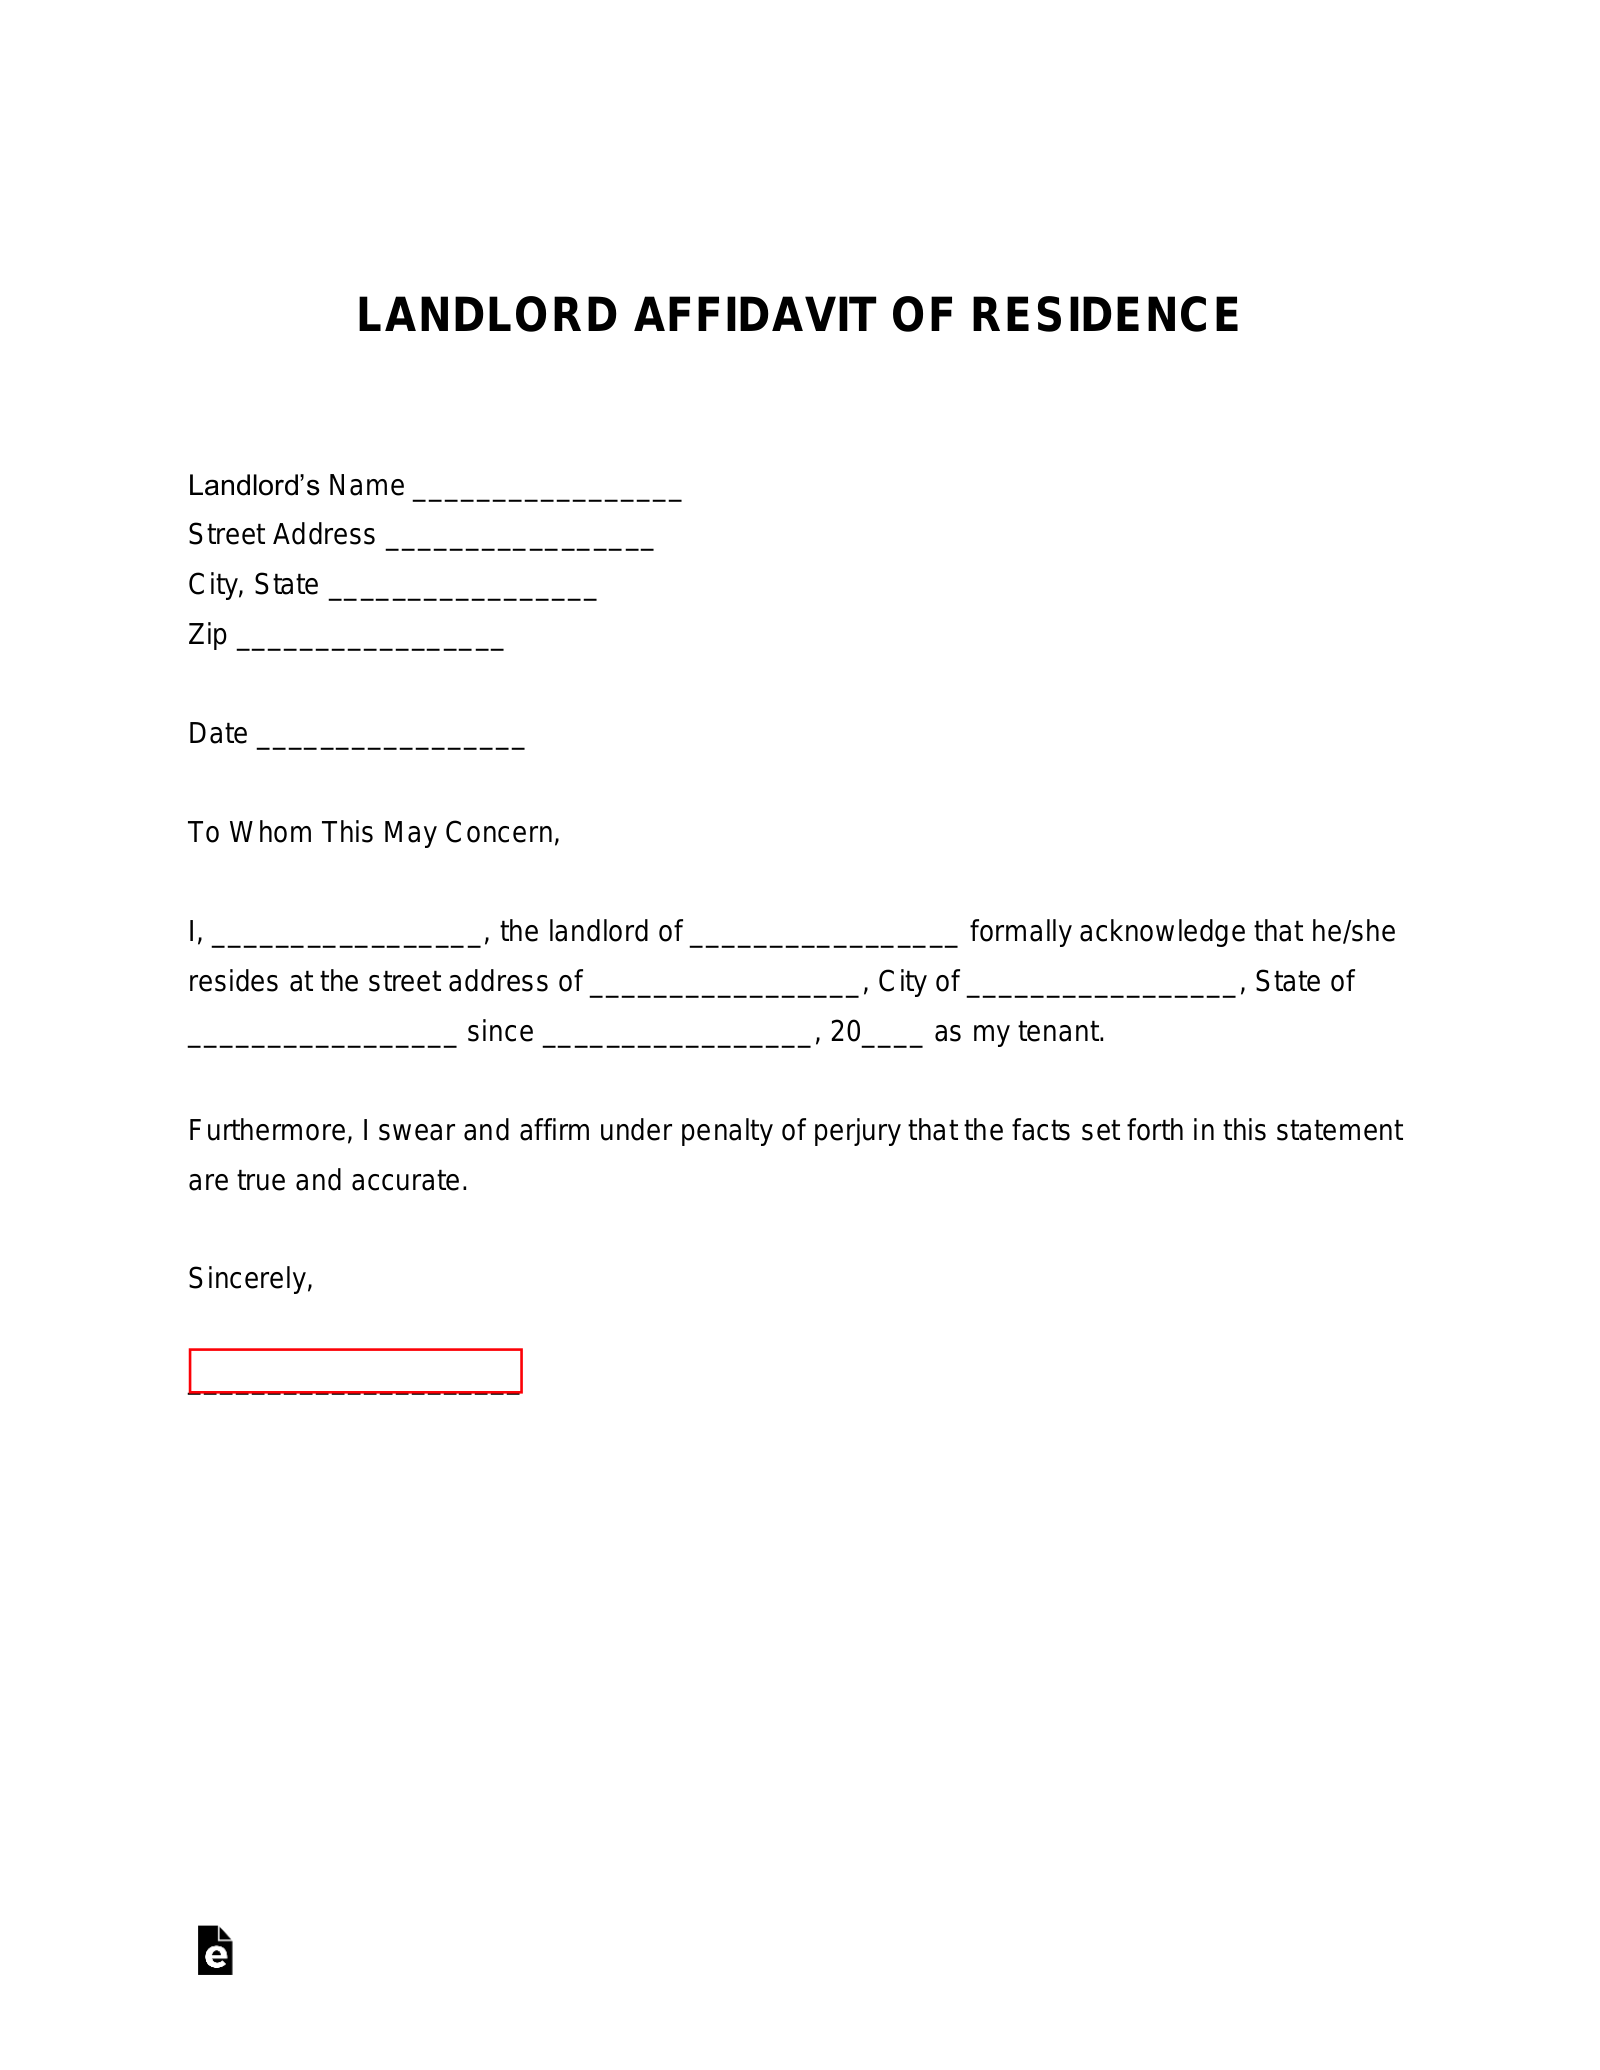 Notarized Proof Of Residency Letter Sample from eforms.com